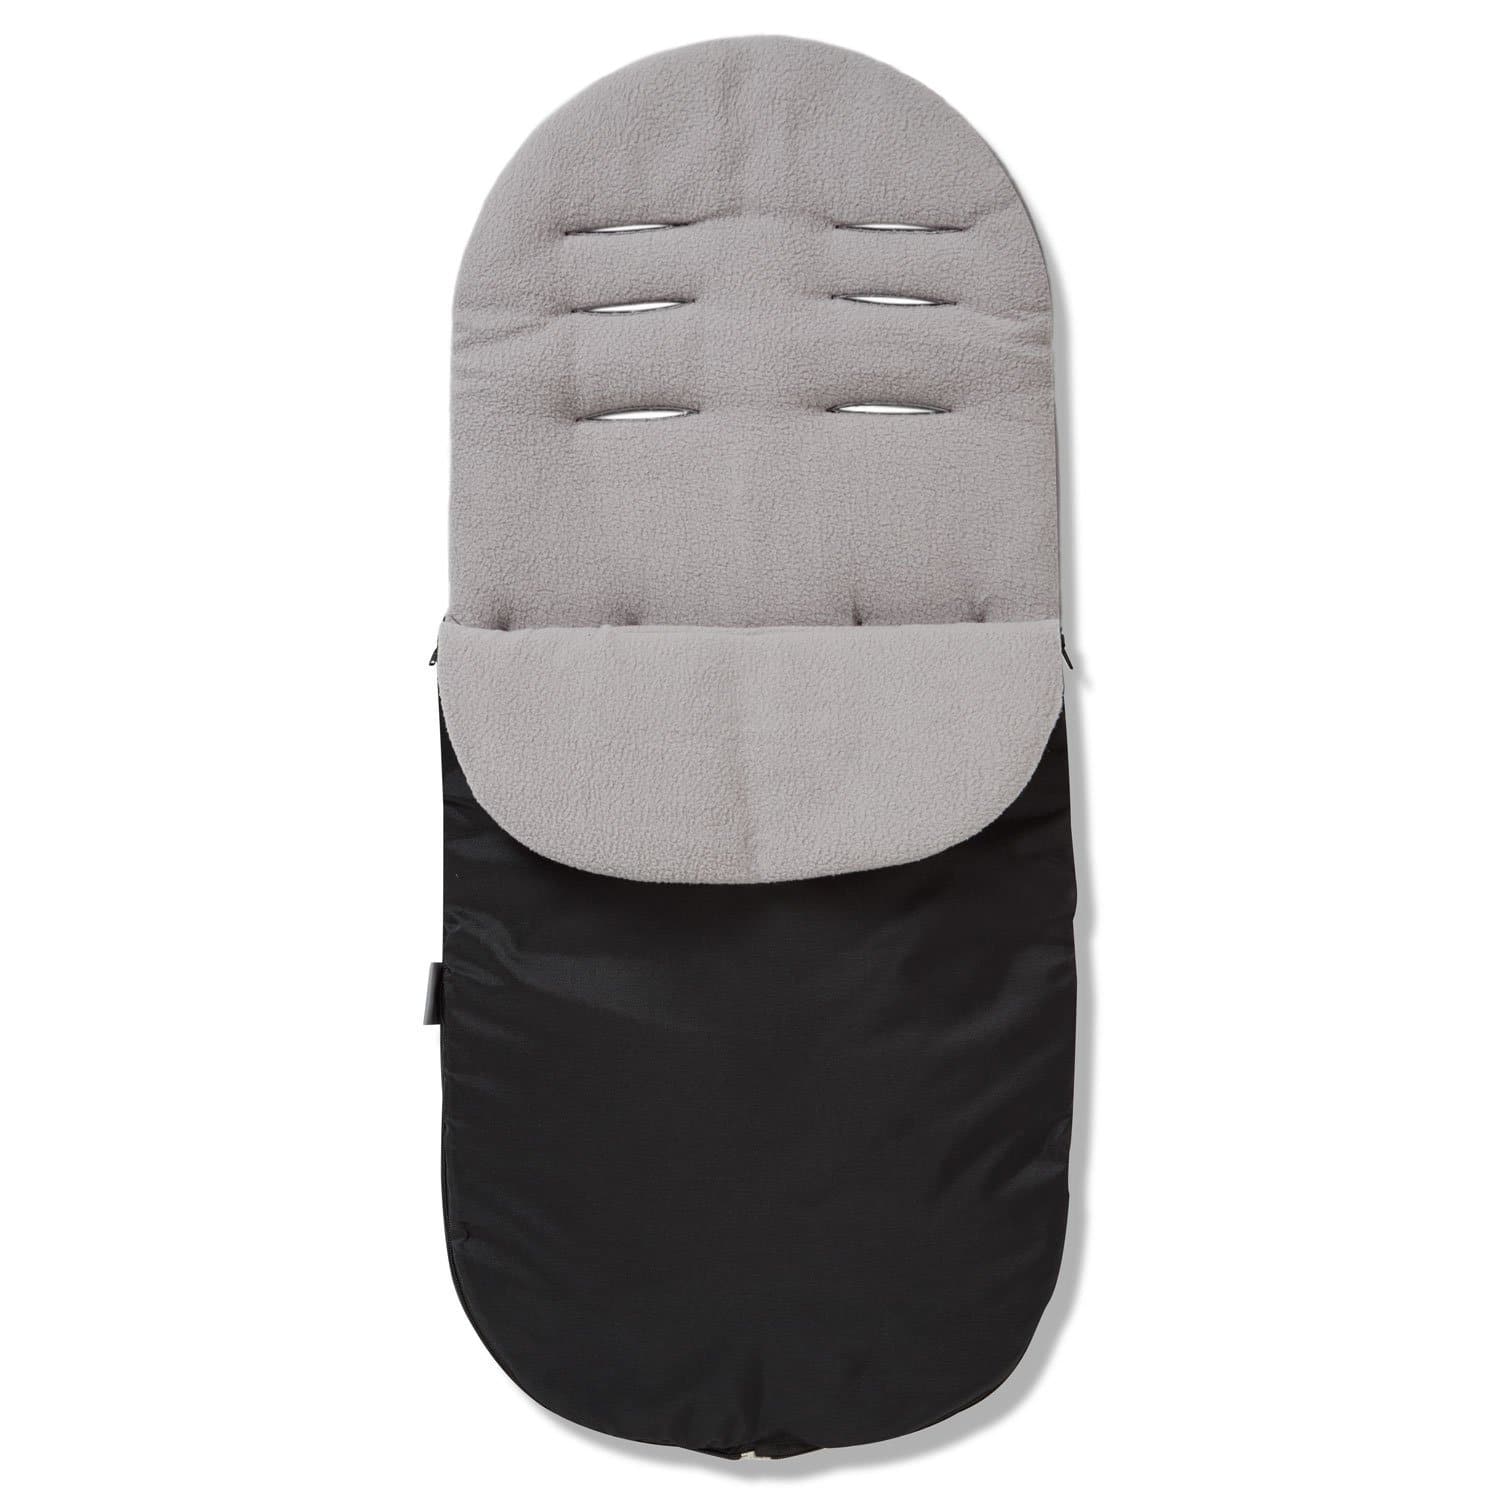 Footmuff / Cosy Toes Compatible with Baby Trend - Grey / Fits All Models | For Your Little One